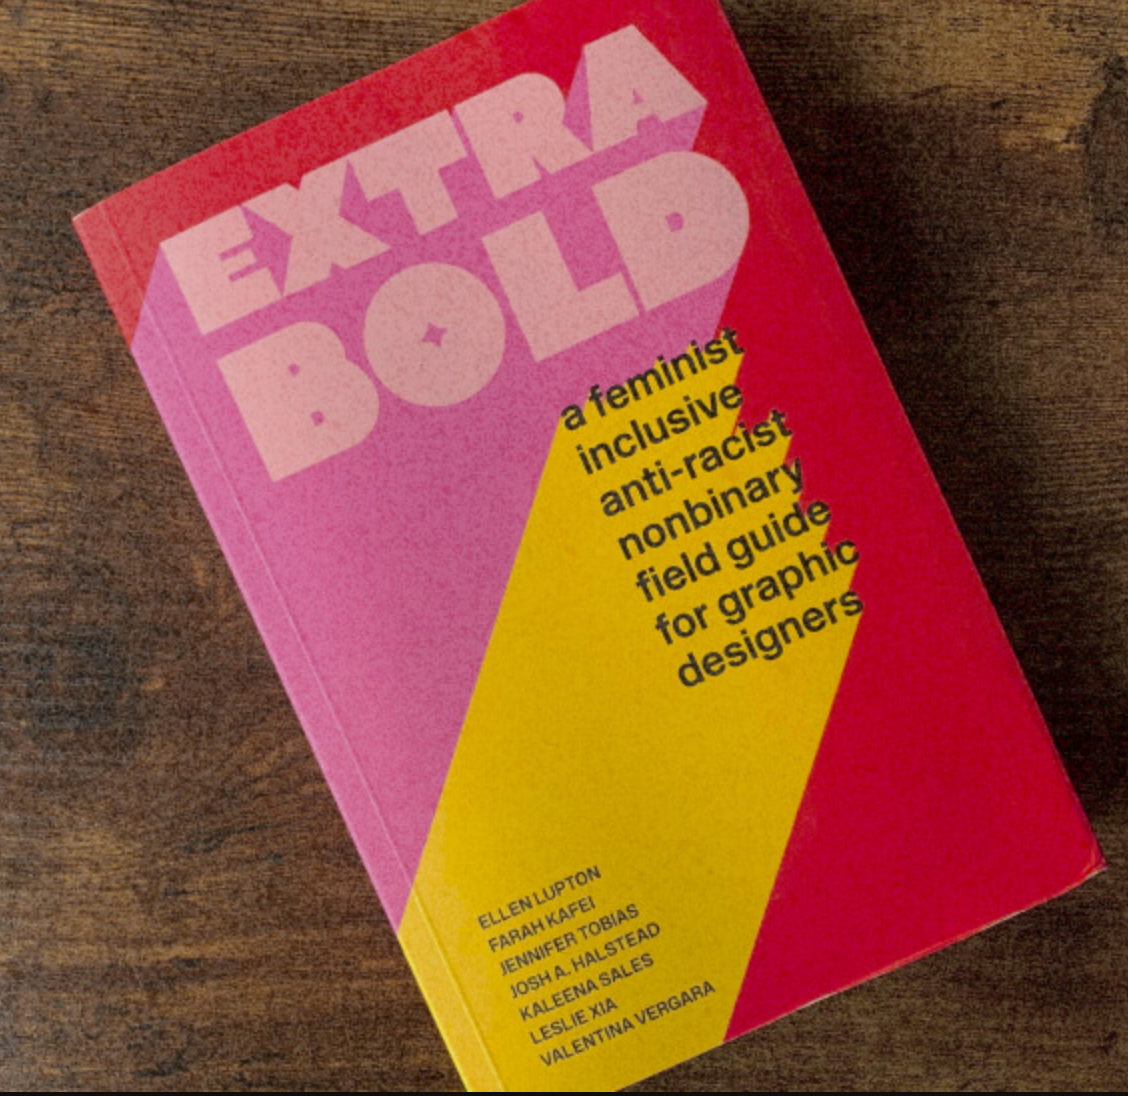 Extra Bold : A Feminist, Inclusive, Anti-Racist, Nonbinary, Field Guide for Graphic Designers